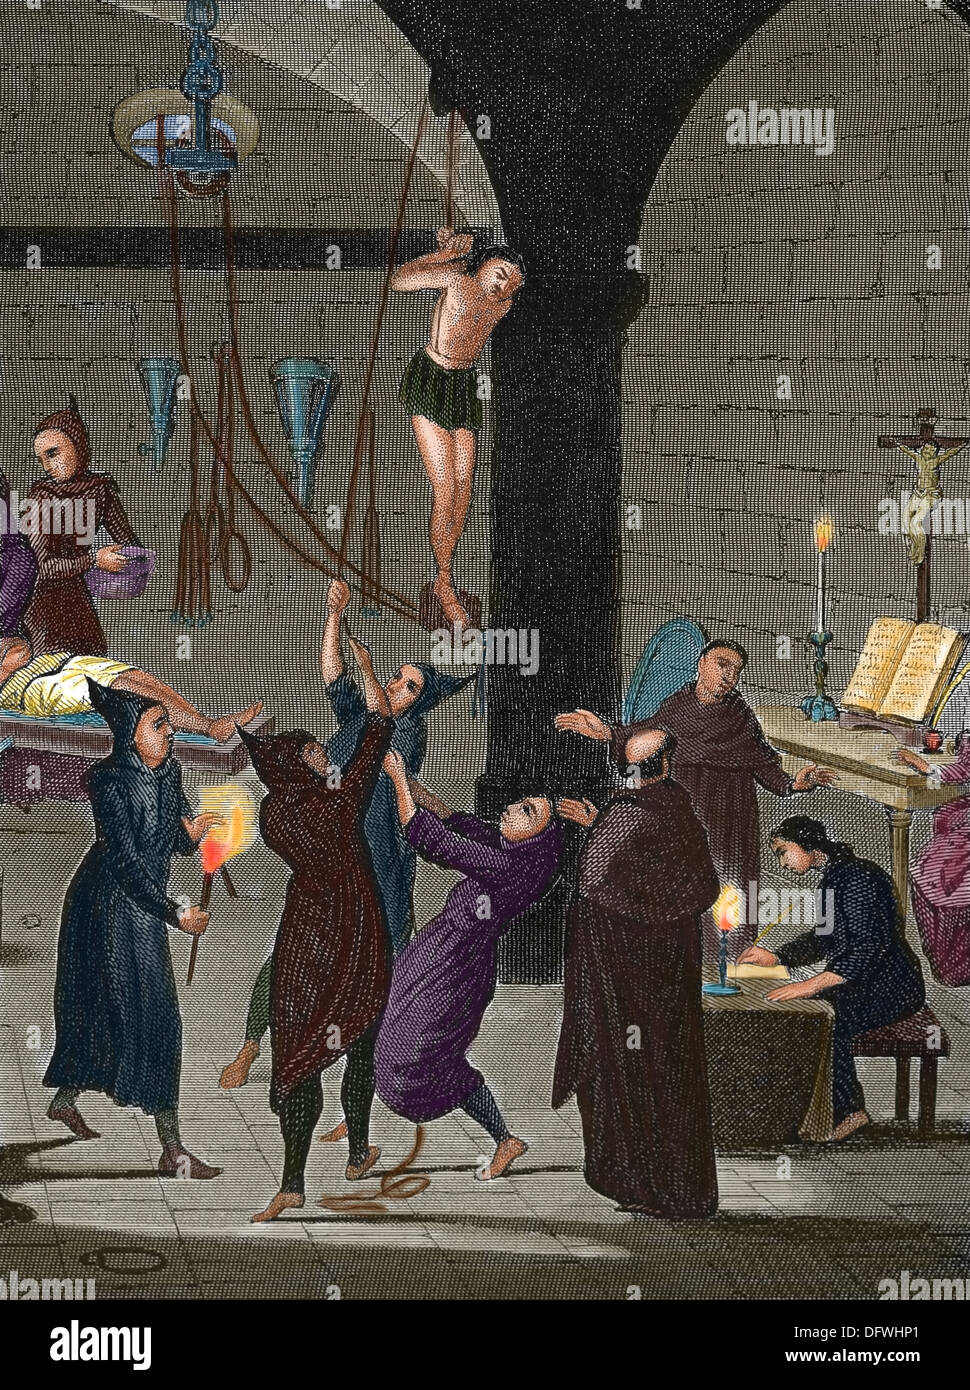 Middle Ages. Inquisition. Confessions and torture. Heretical behaviour of Catholic adherents or converts. Colored engraving. Stock Photo